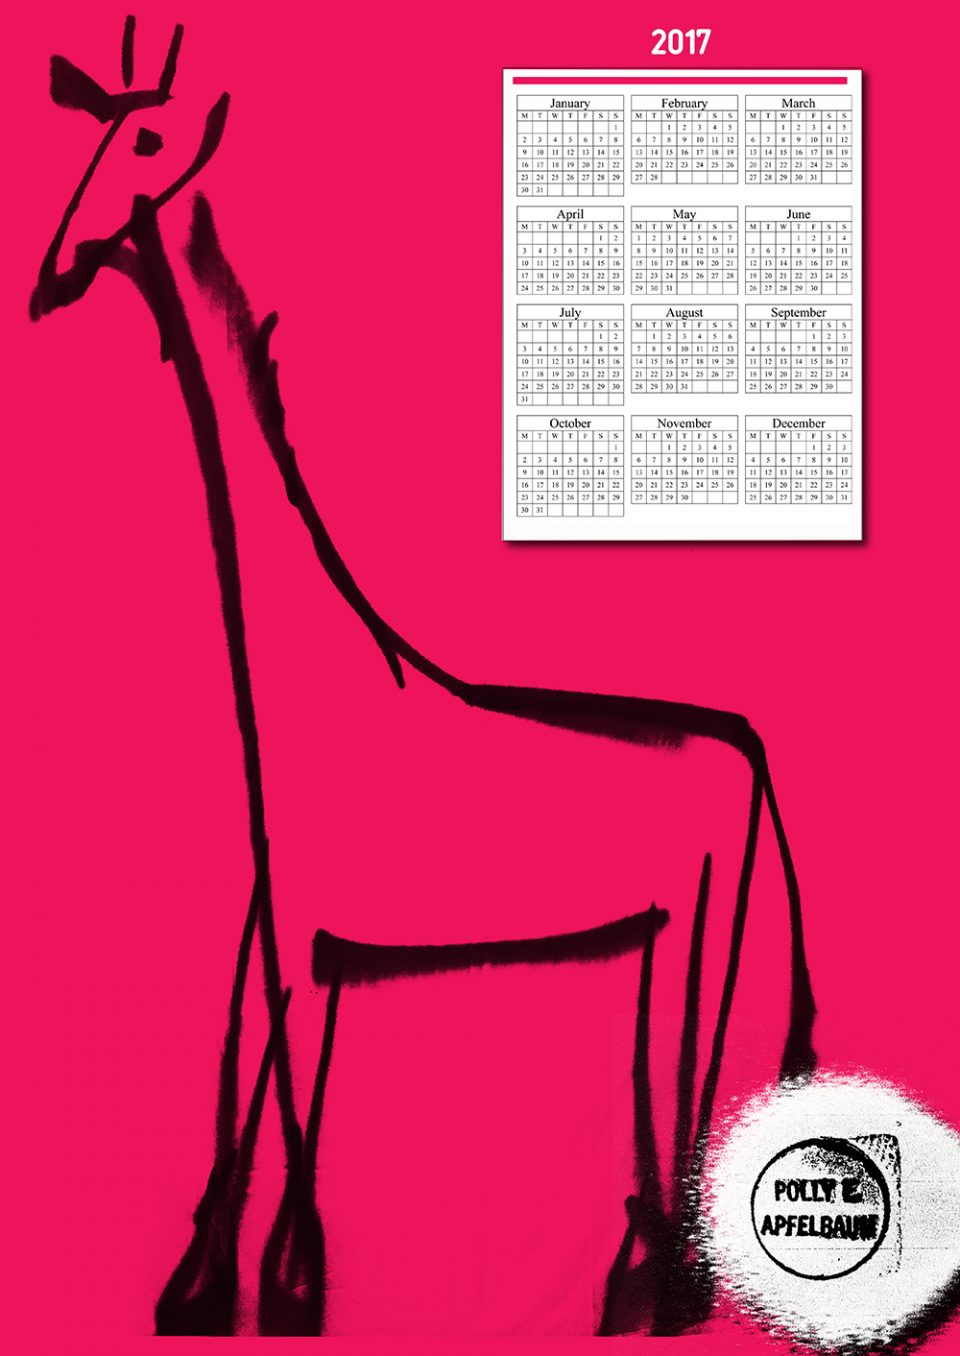 Line drawing of giraffe on pink background with calendar in top right-hand corner.